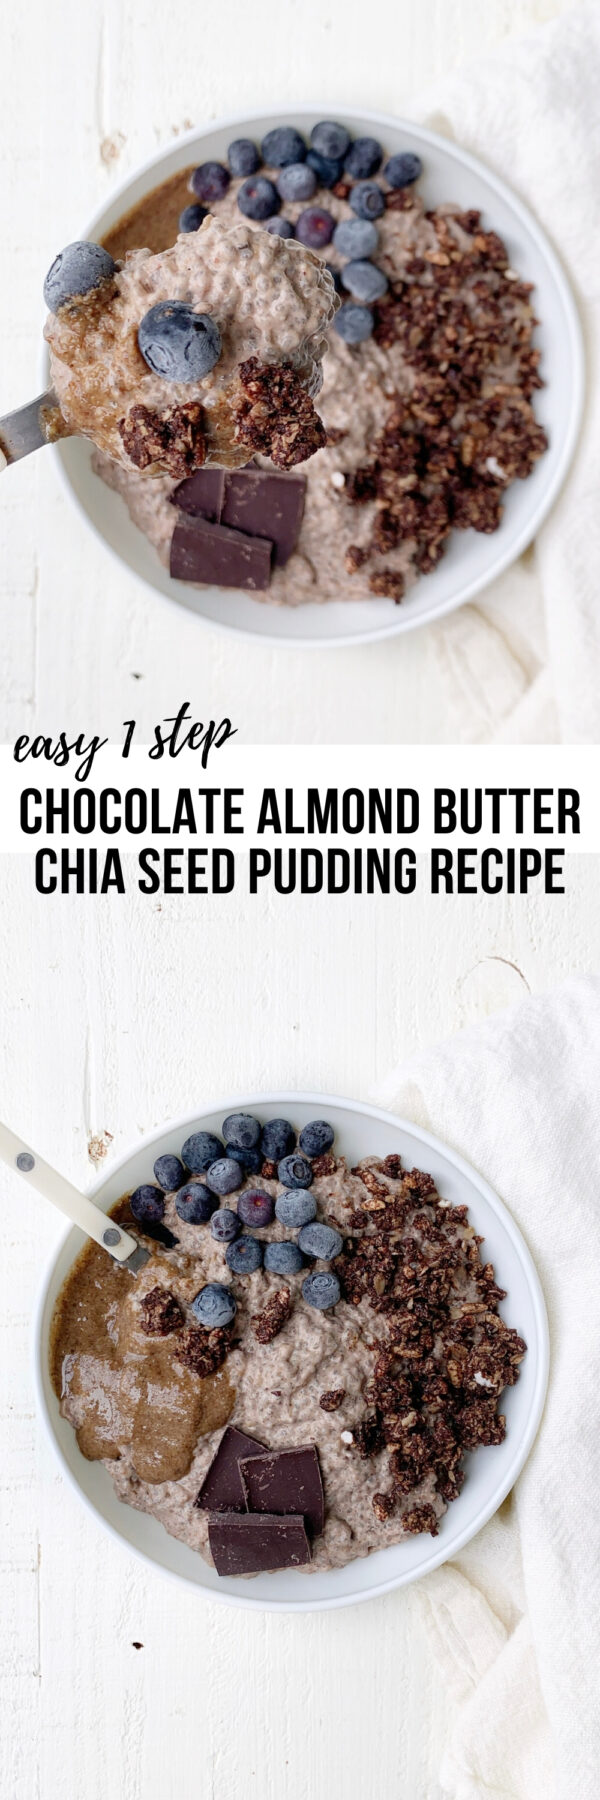 Chocolate Almond Butter Chia Seed Pudding Recipe - Public Lives, Secret ...